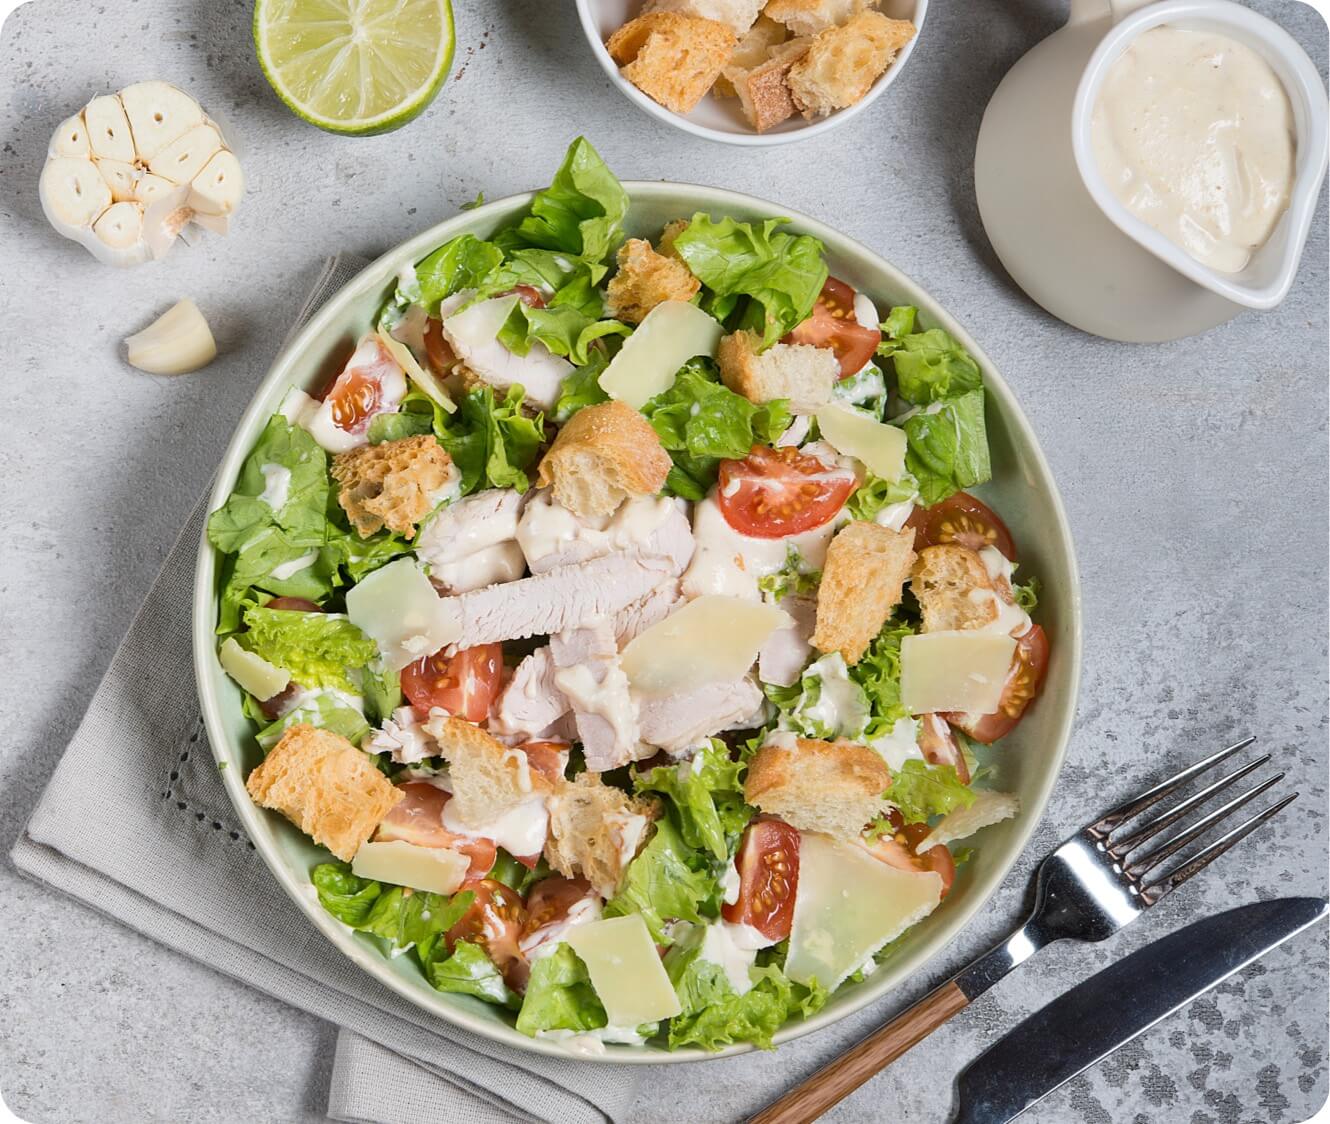 Paul's Caesar Salad with Croutons